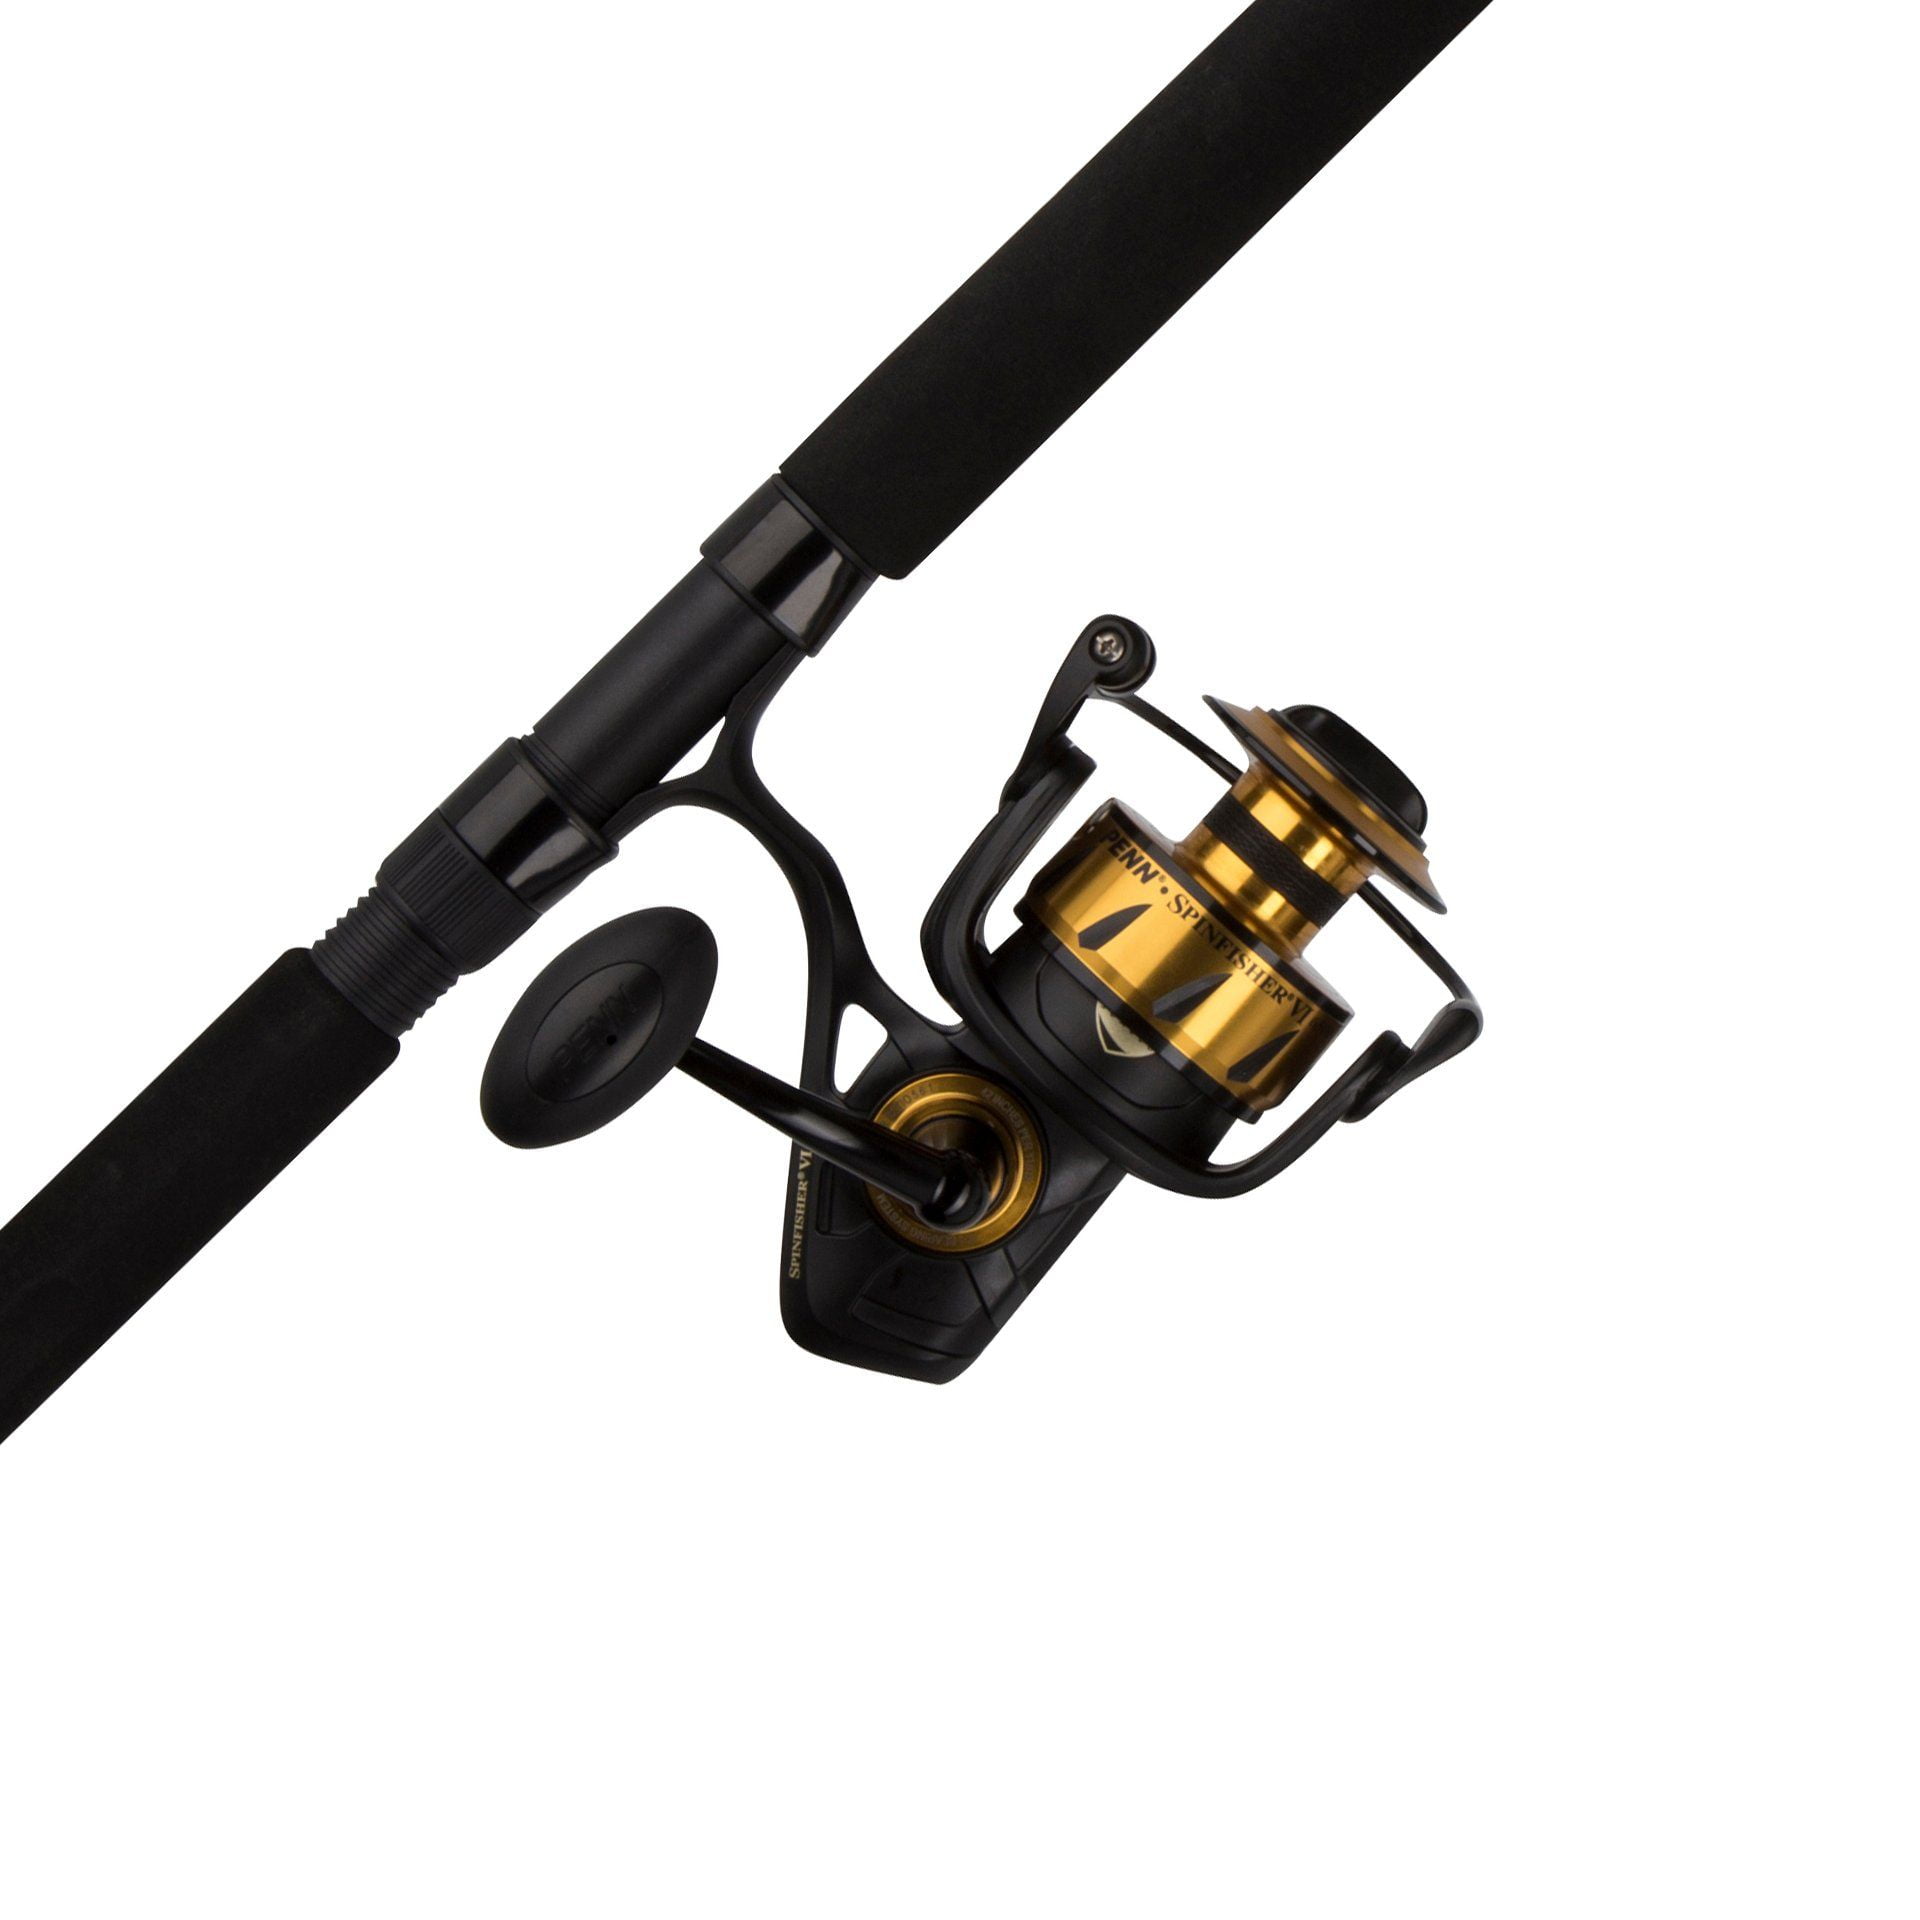 PENN Spinfisher VI Fishing Rod and Reel Spinning Combo, 6'6